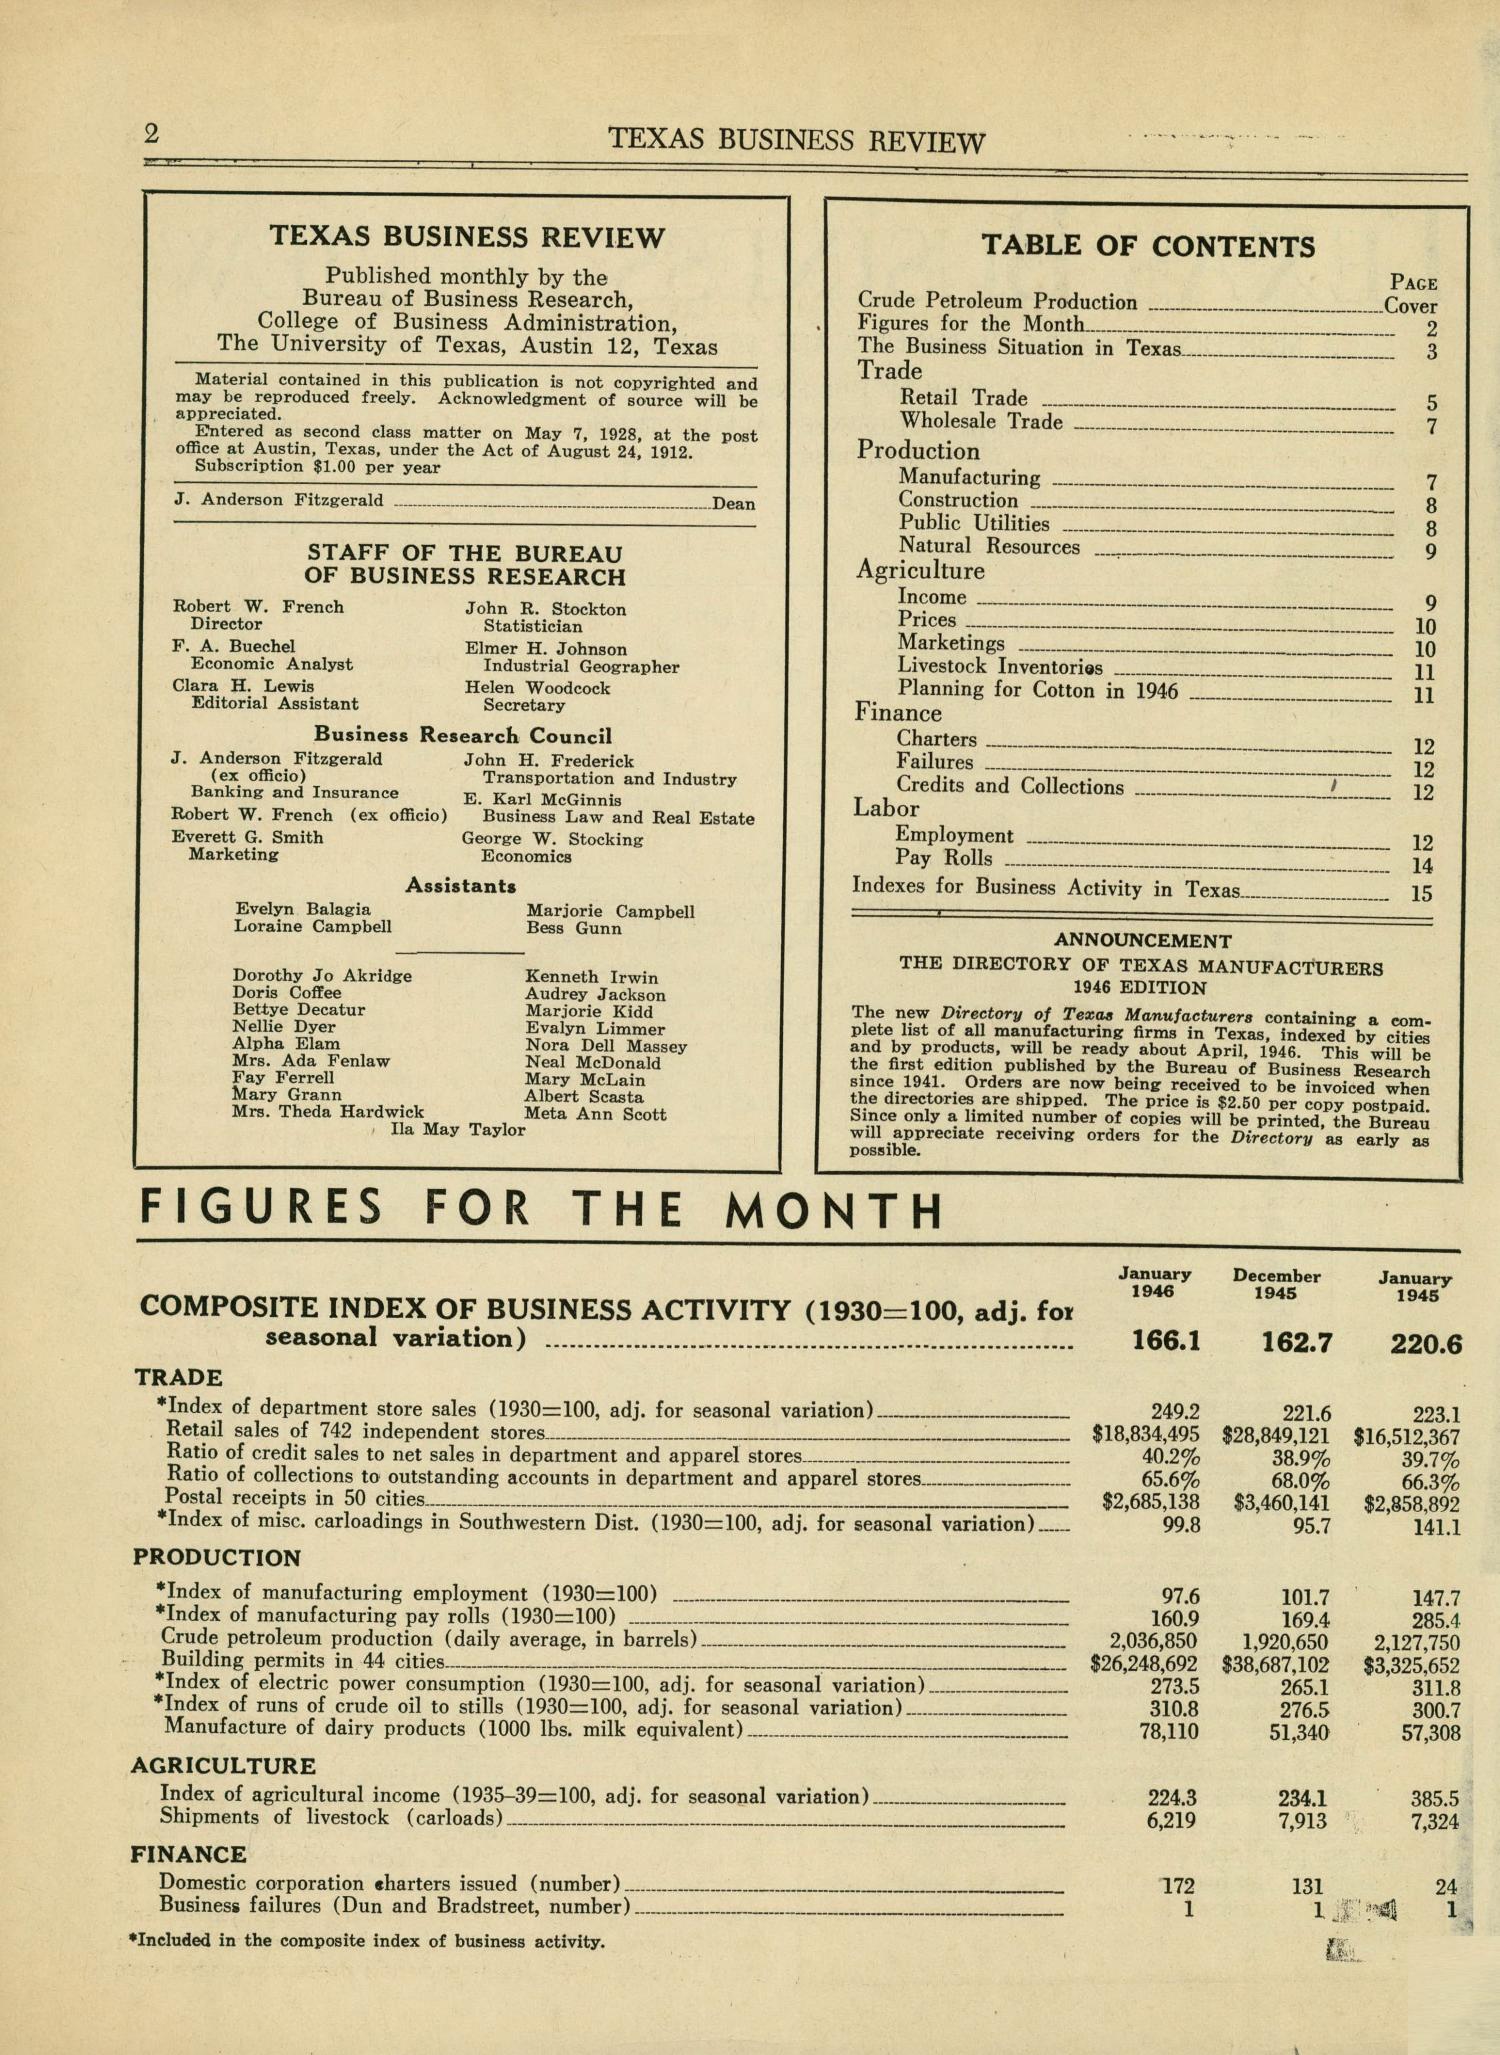 Texas Business Review, Volume 20, Issue 1, February 1946
                                                
                                                    INSIDE FRONT COVER
                                                